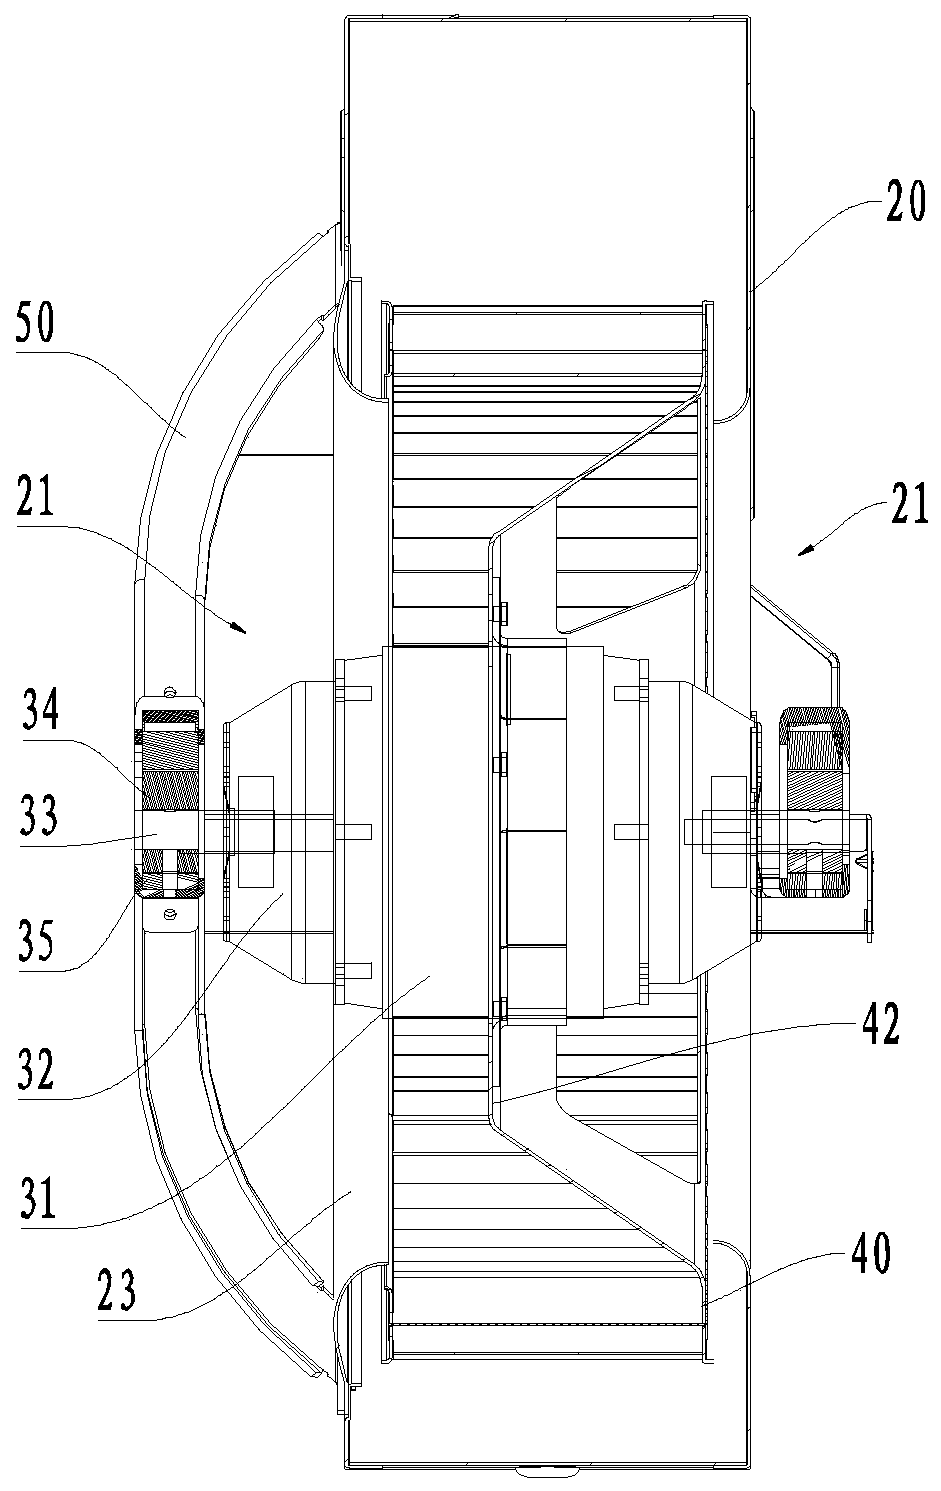 Centrifugal fan and electrical equipment